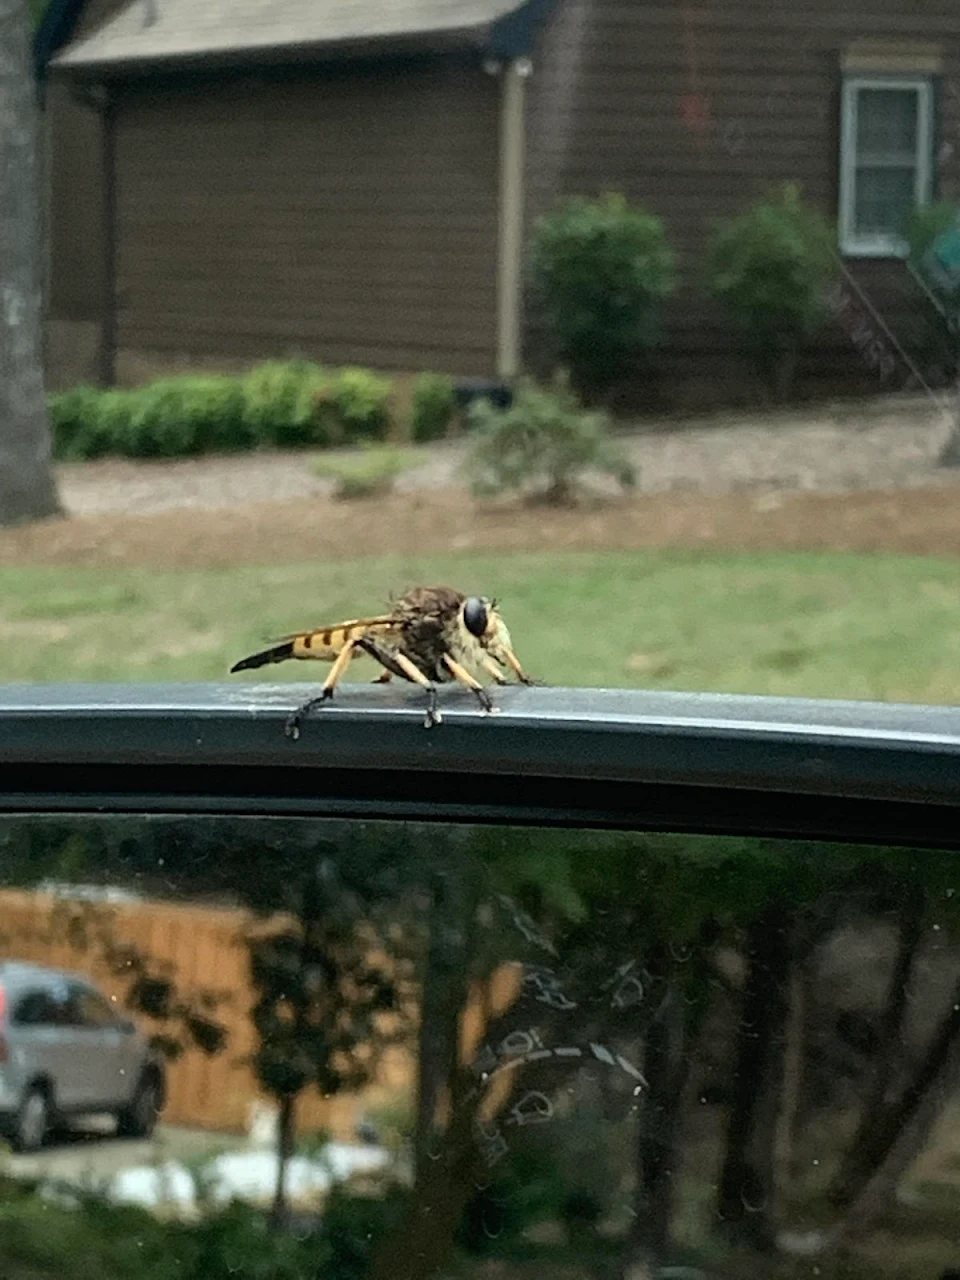 What kind of hornet?